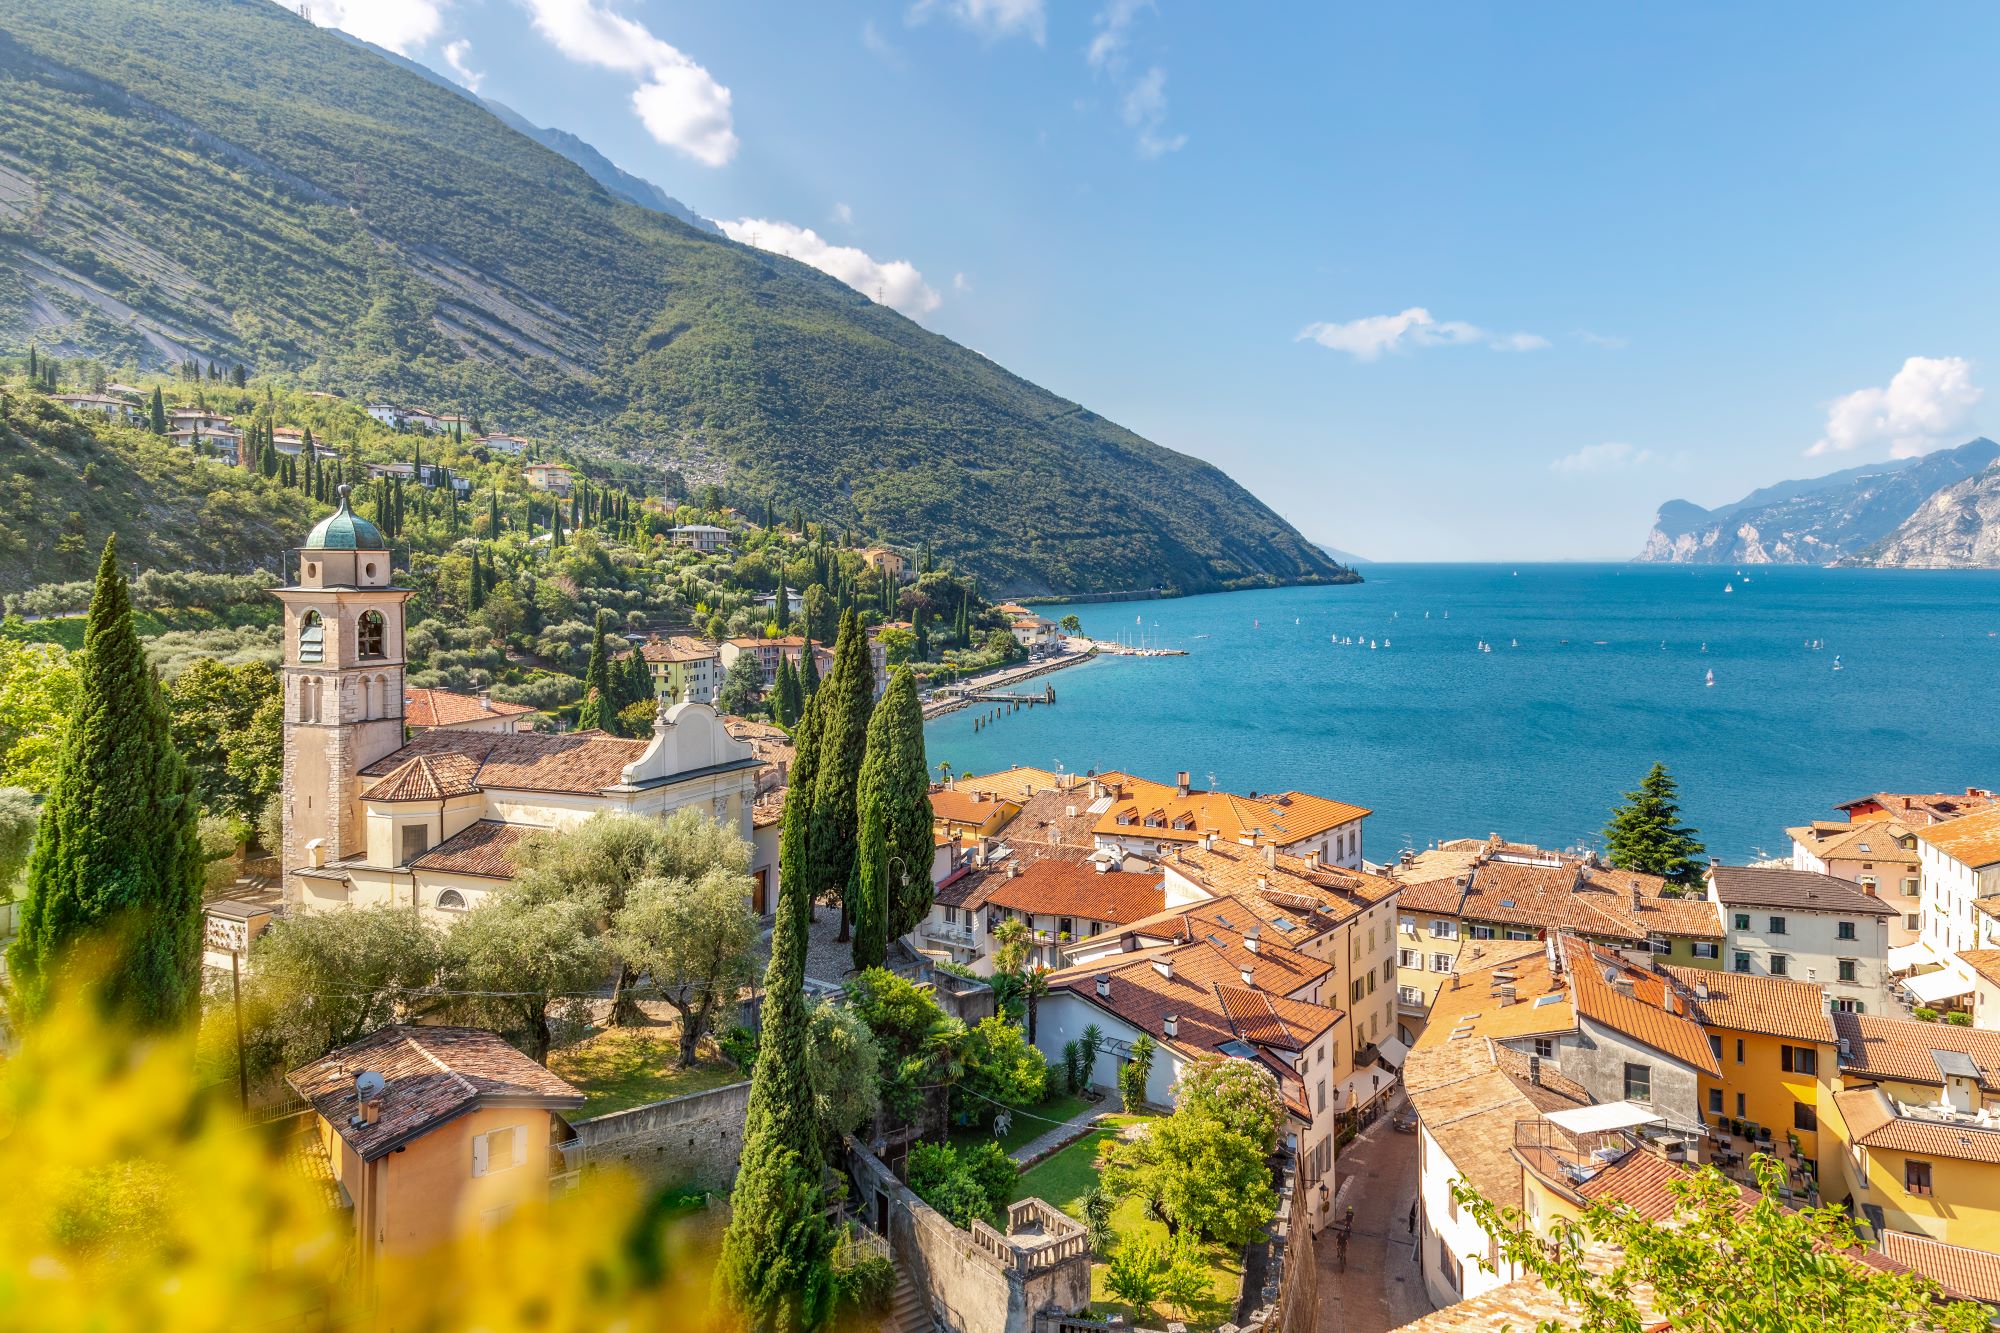 Discover Torbole on Lake Garda: A perfect destination for water sports and stunning landscapes.